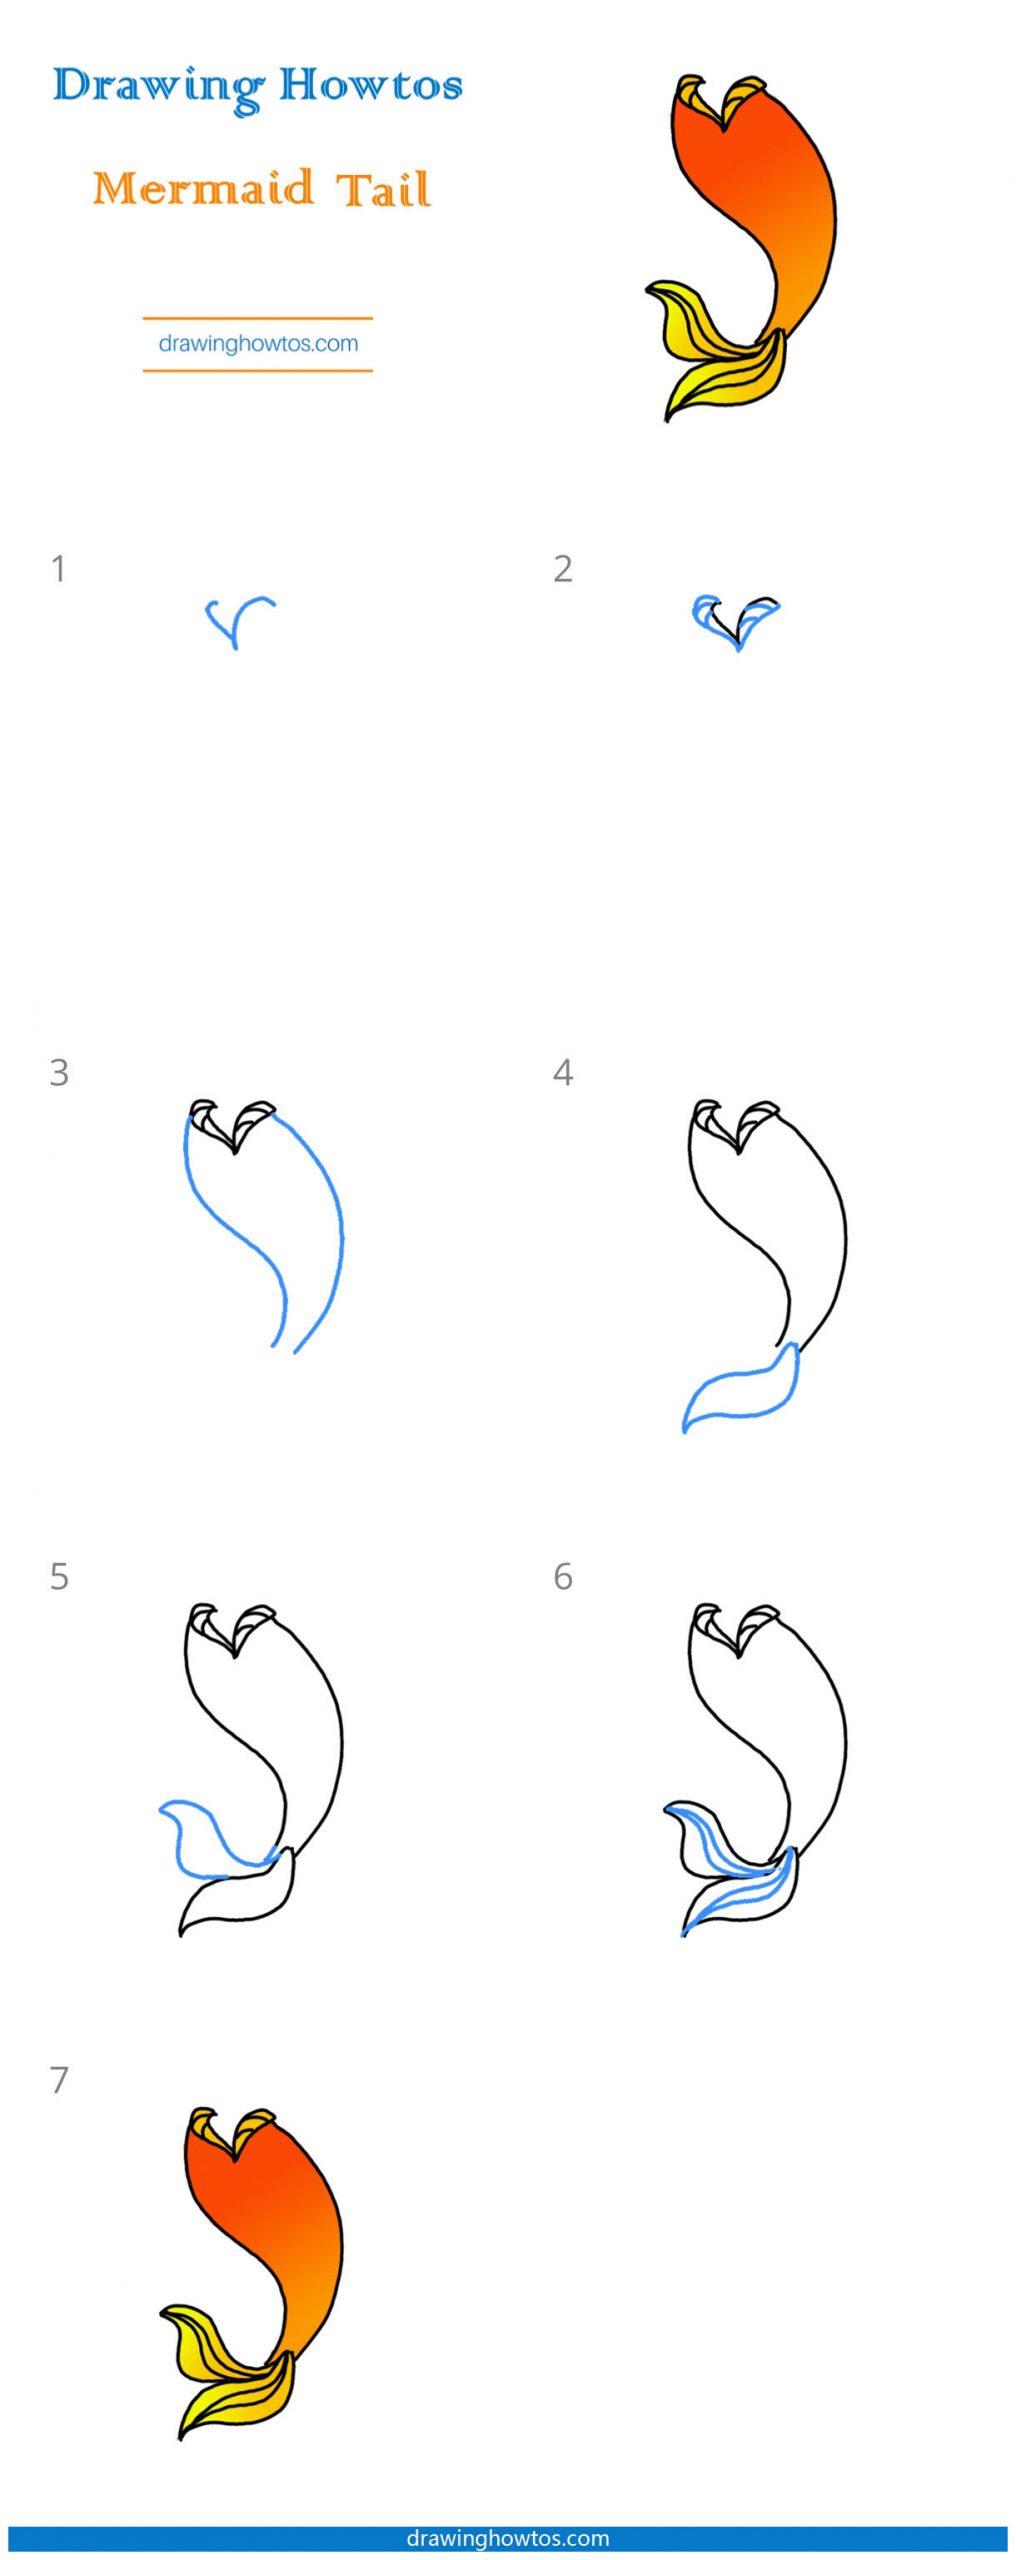 How to Draw a Mermaid Tail Step by Step